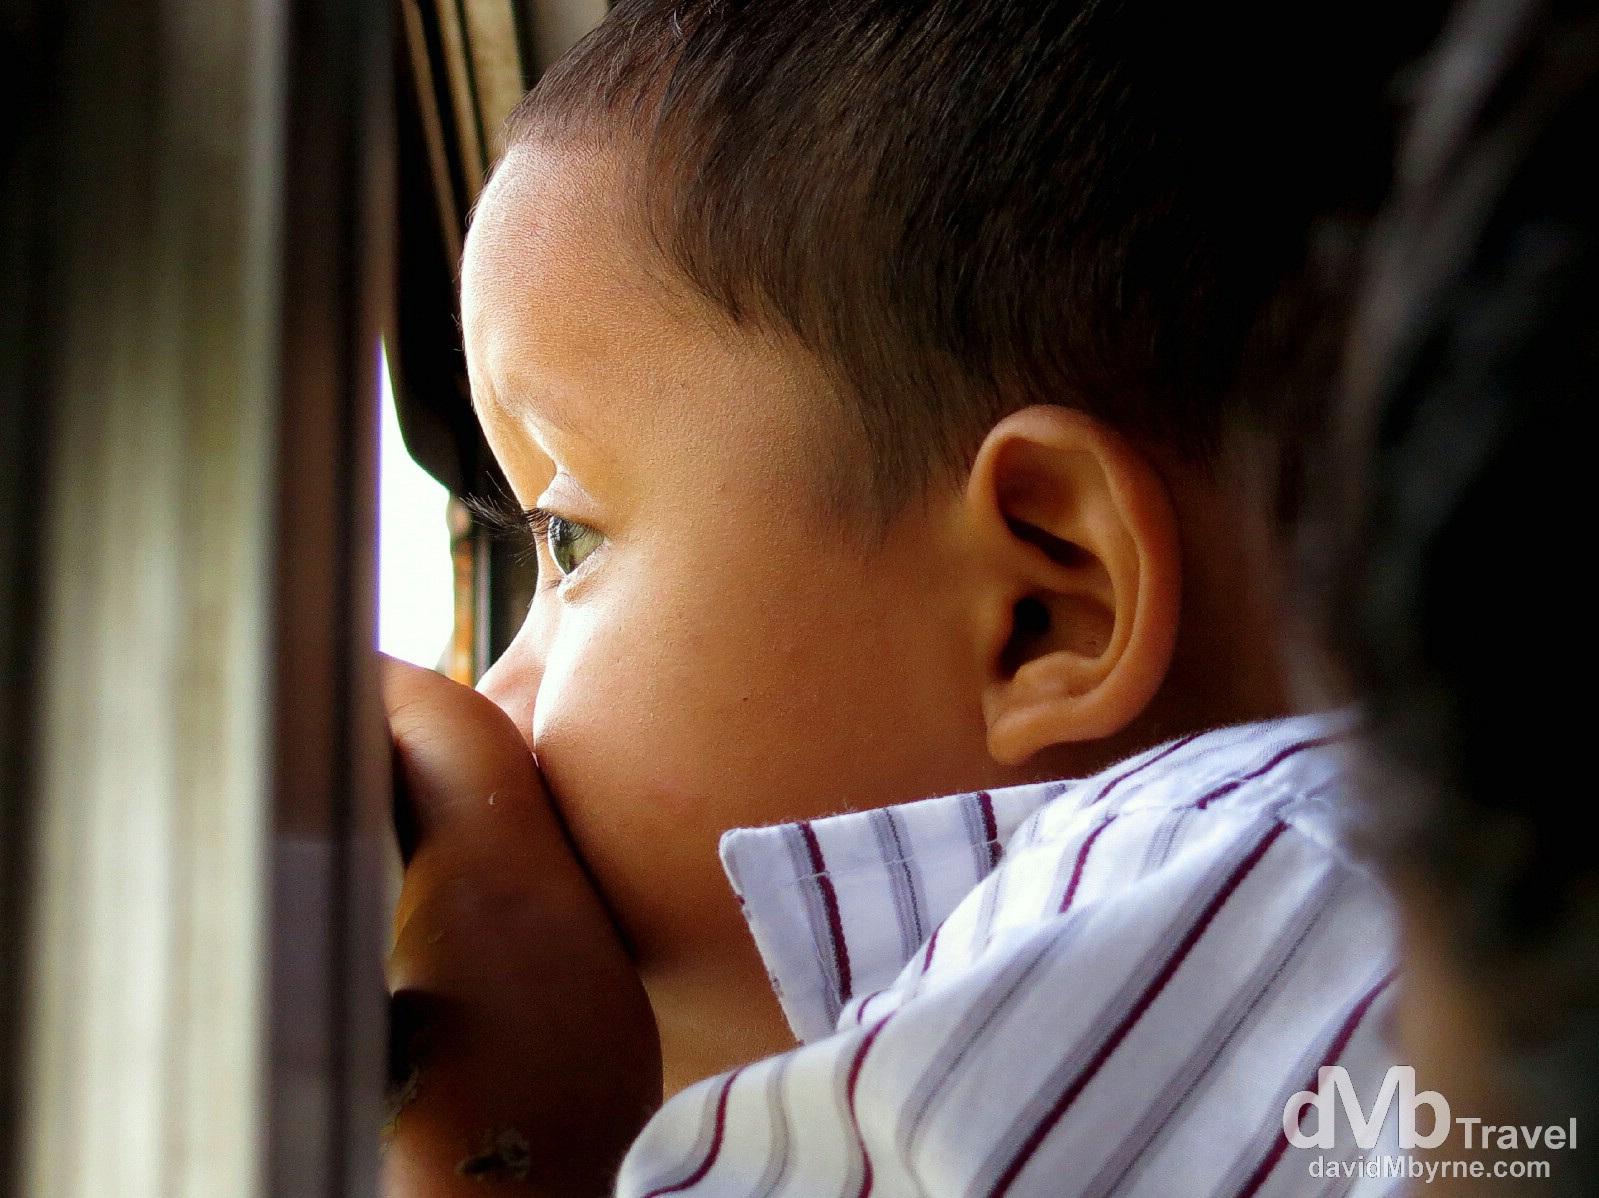 A boy looking out the window on the bus to the ferry terminal in Isla de la Ometepe, Lago de Nicaragua, Nicaragua. June 21st 2013.